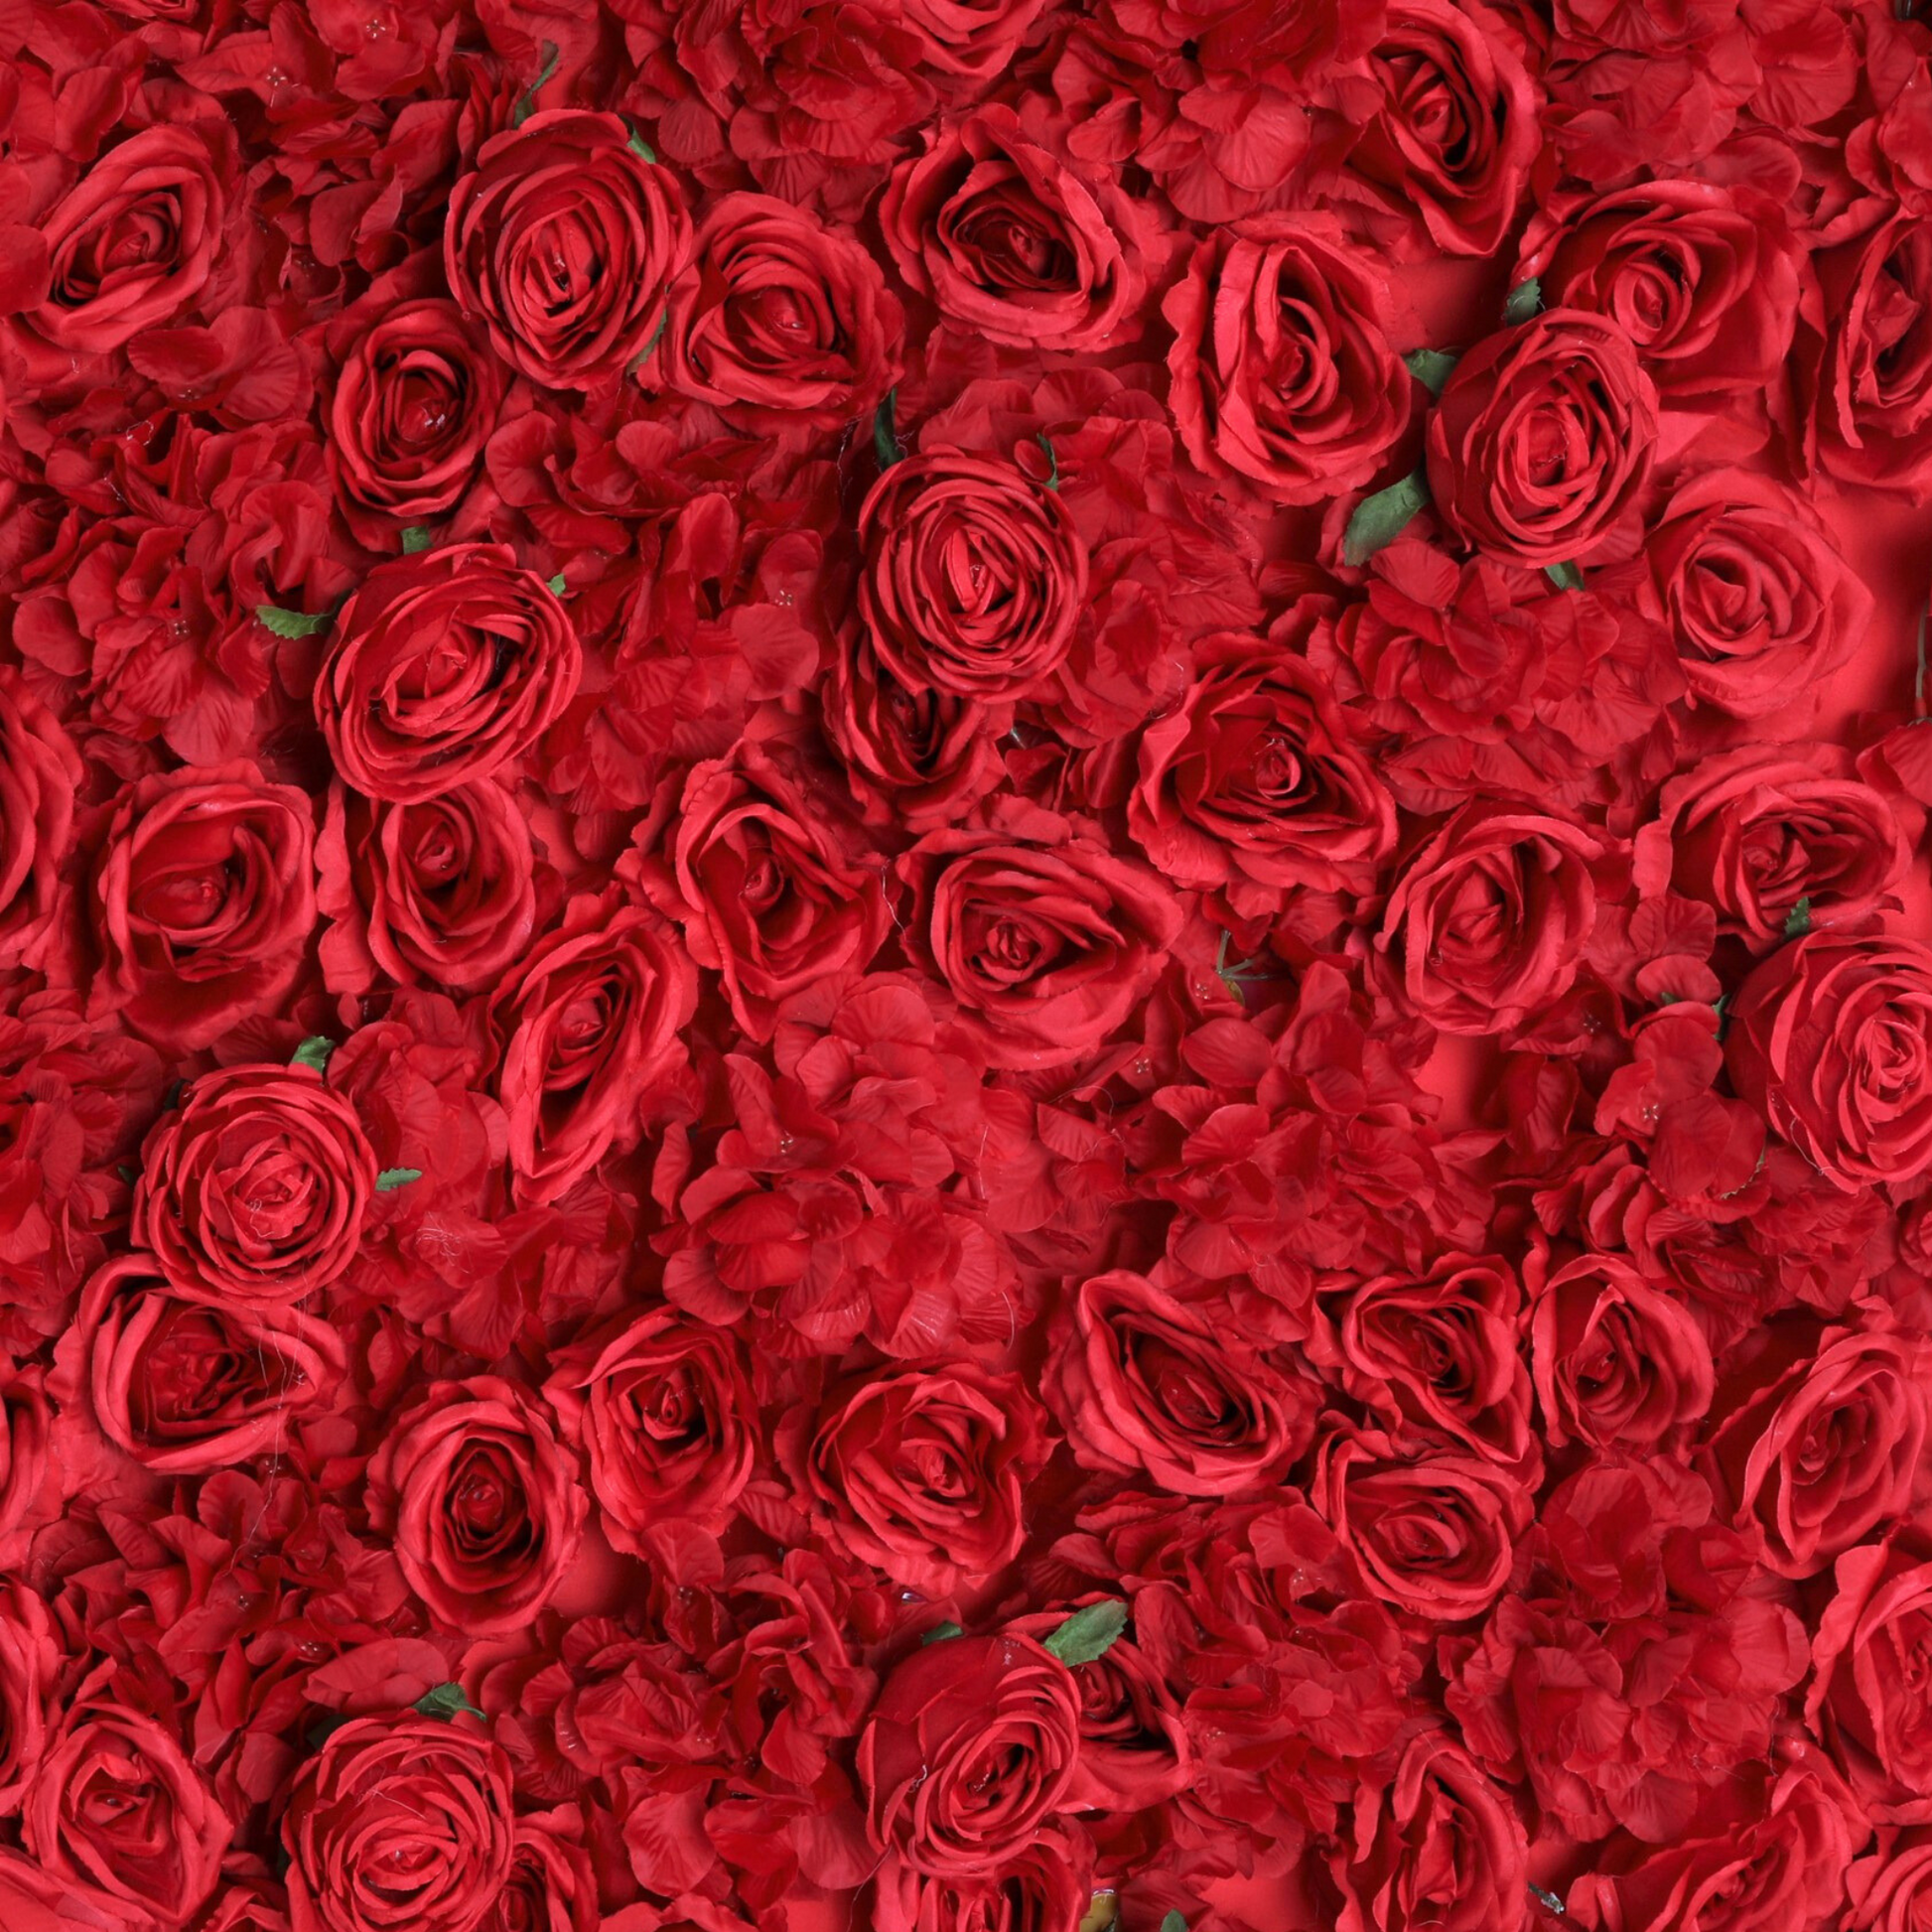 Roll Up Flower Wall Backdrop 8ft x 4ft - Red